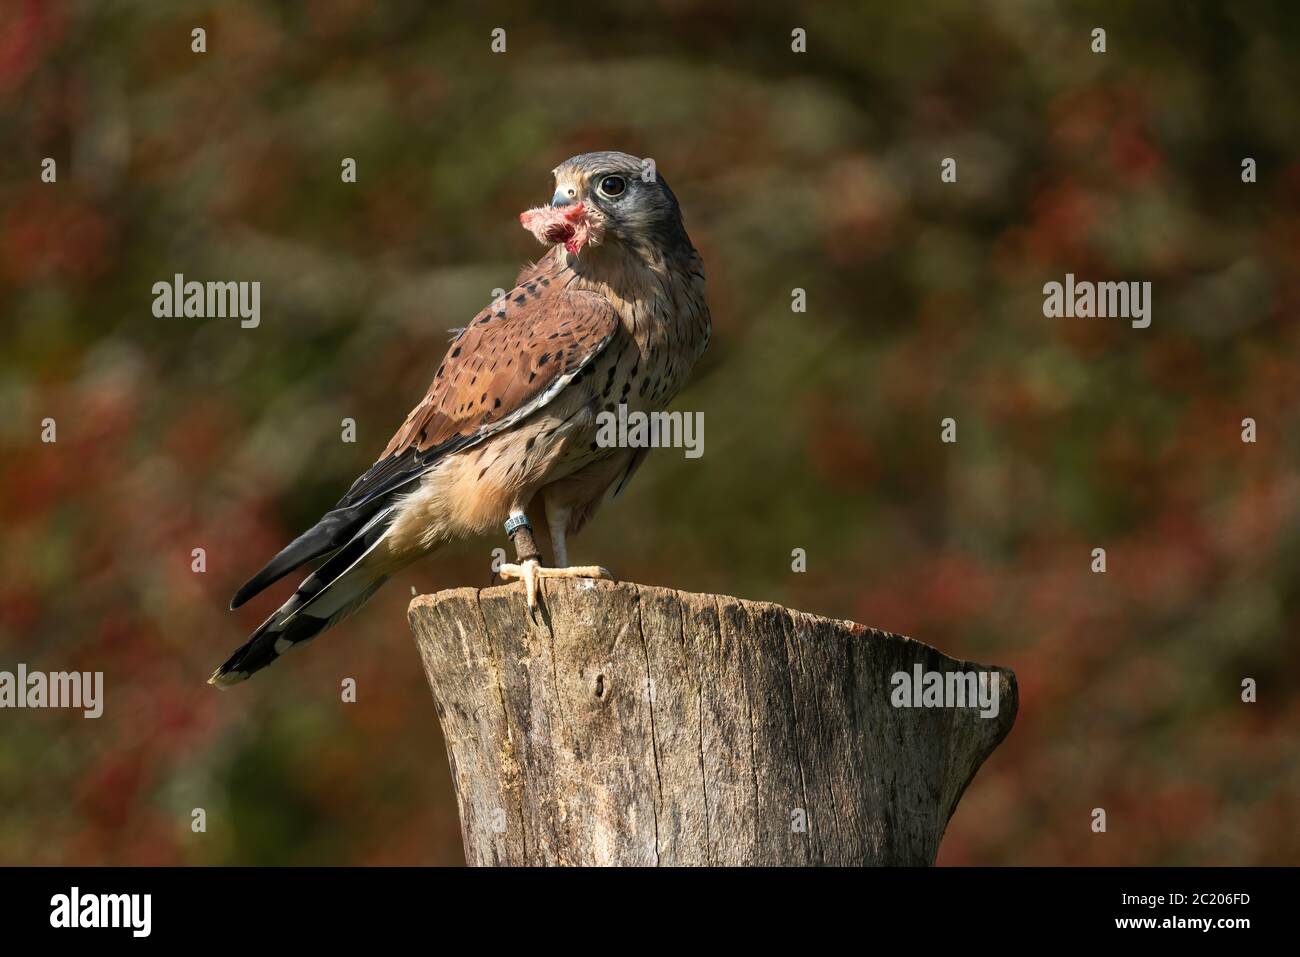 Kestrel having been in flight now perched eating it's catch stock photo Stock Photo